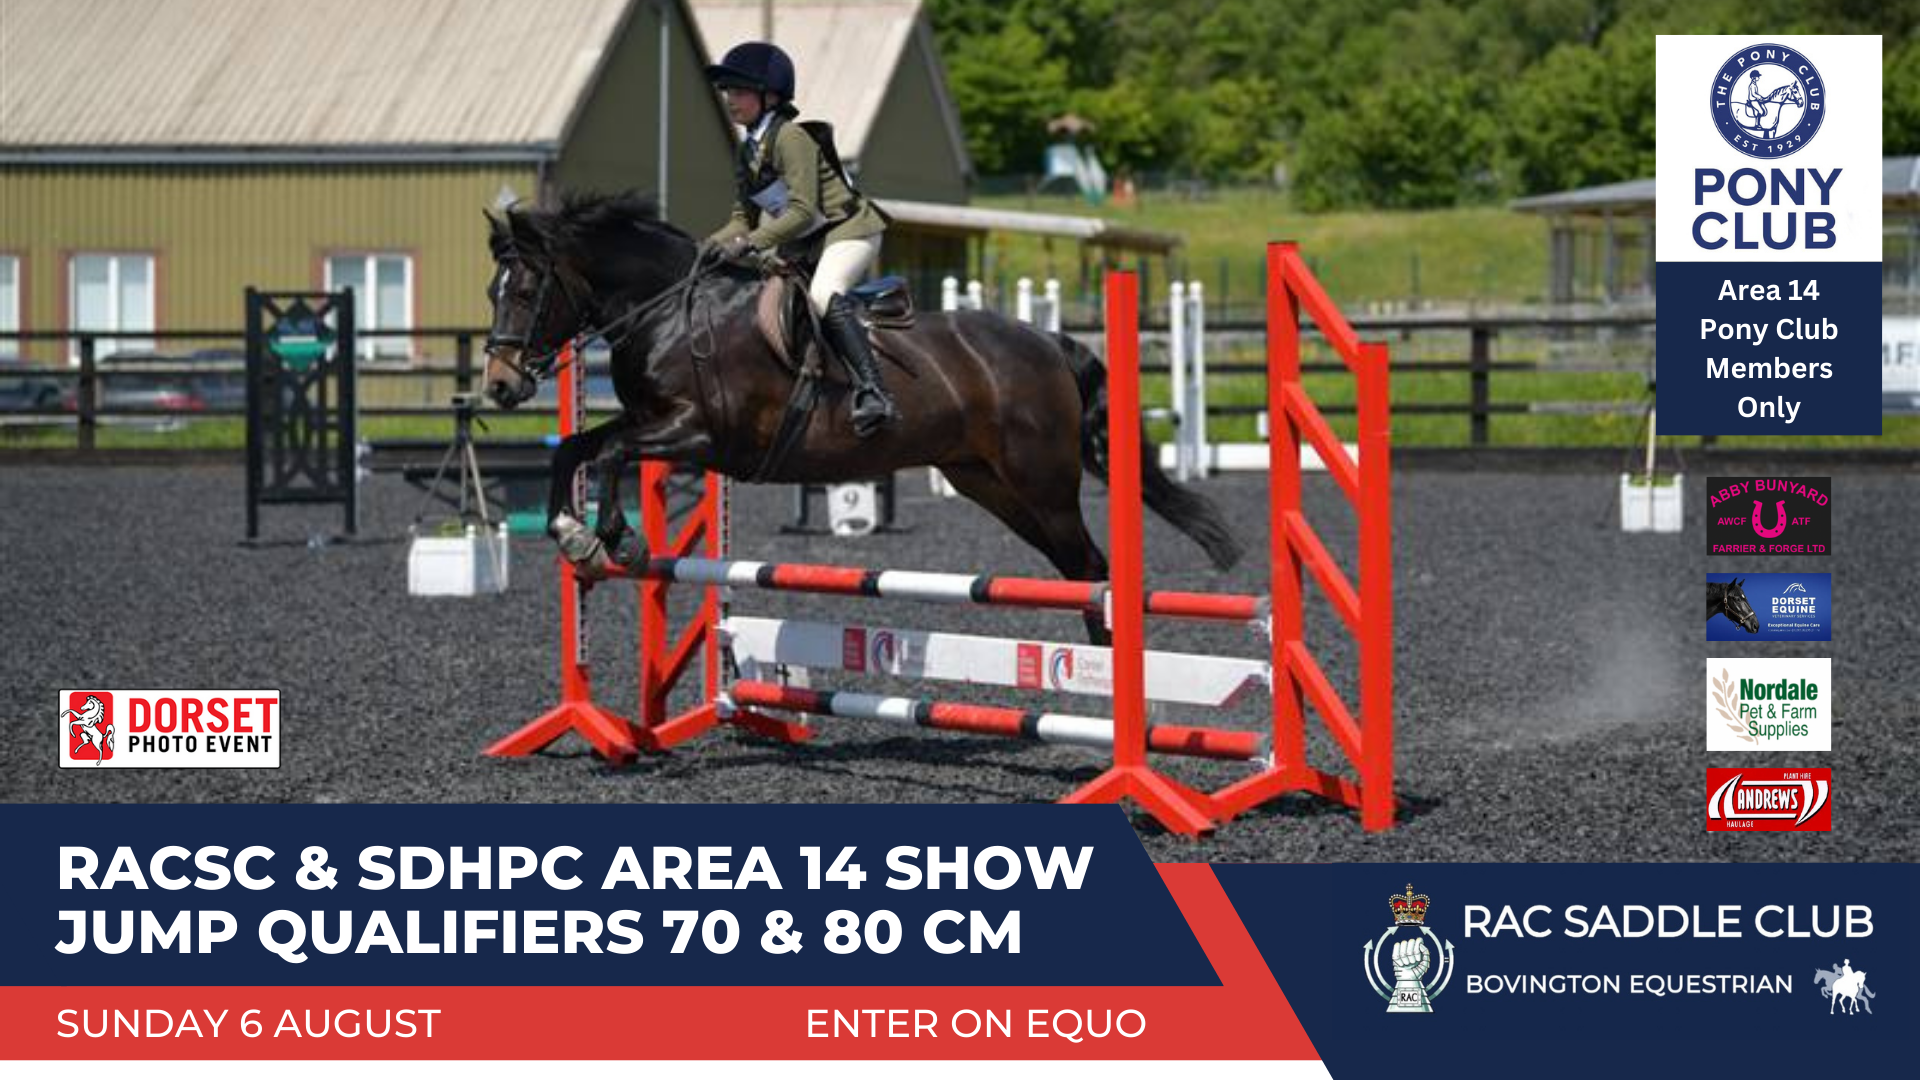 Pony Club Area 14 Show Jumping Qualifiers – Sunday 6 August